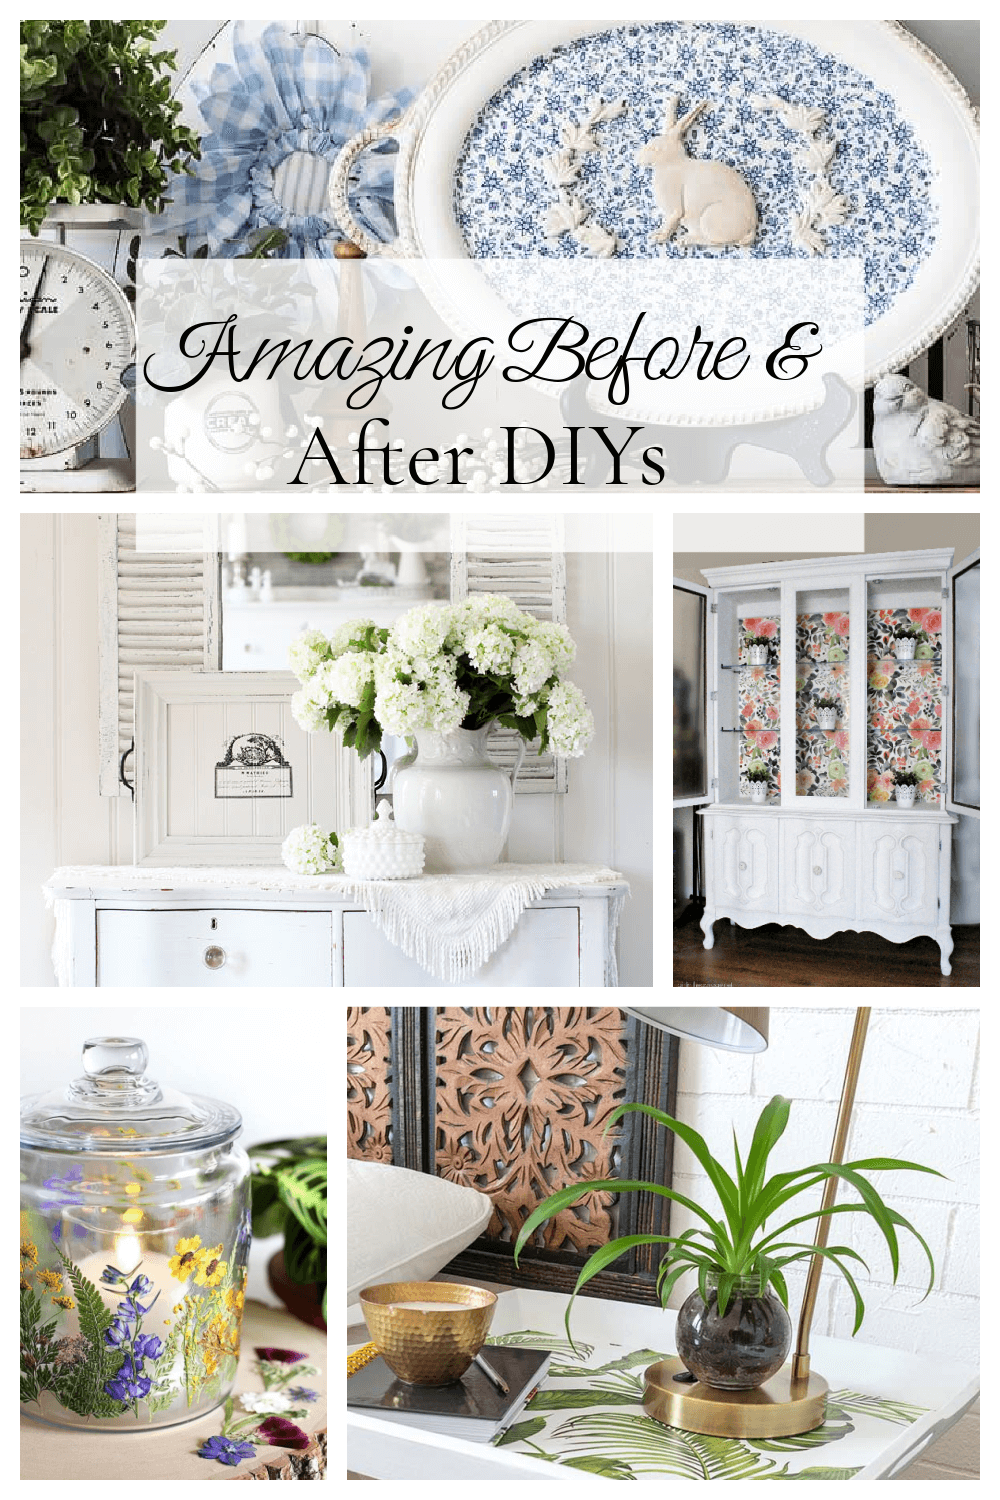 Amazing Before & After DIYs